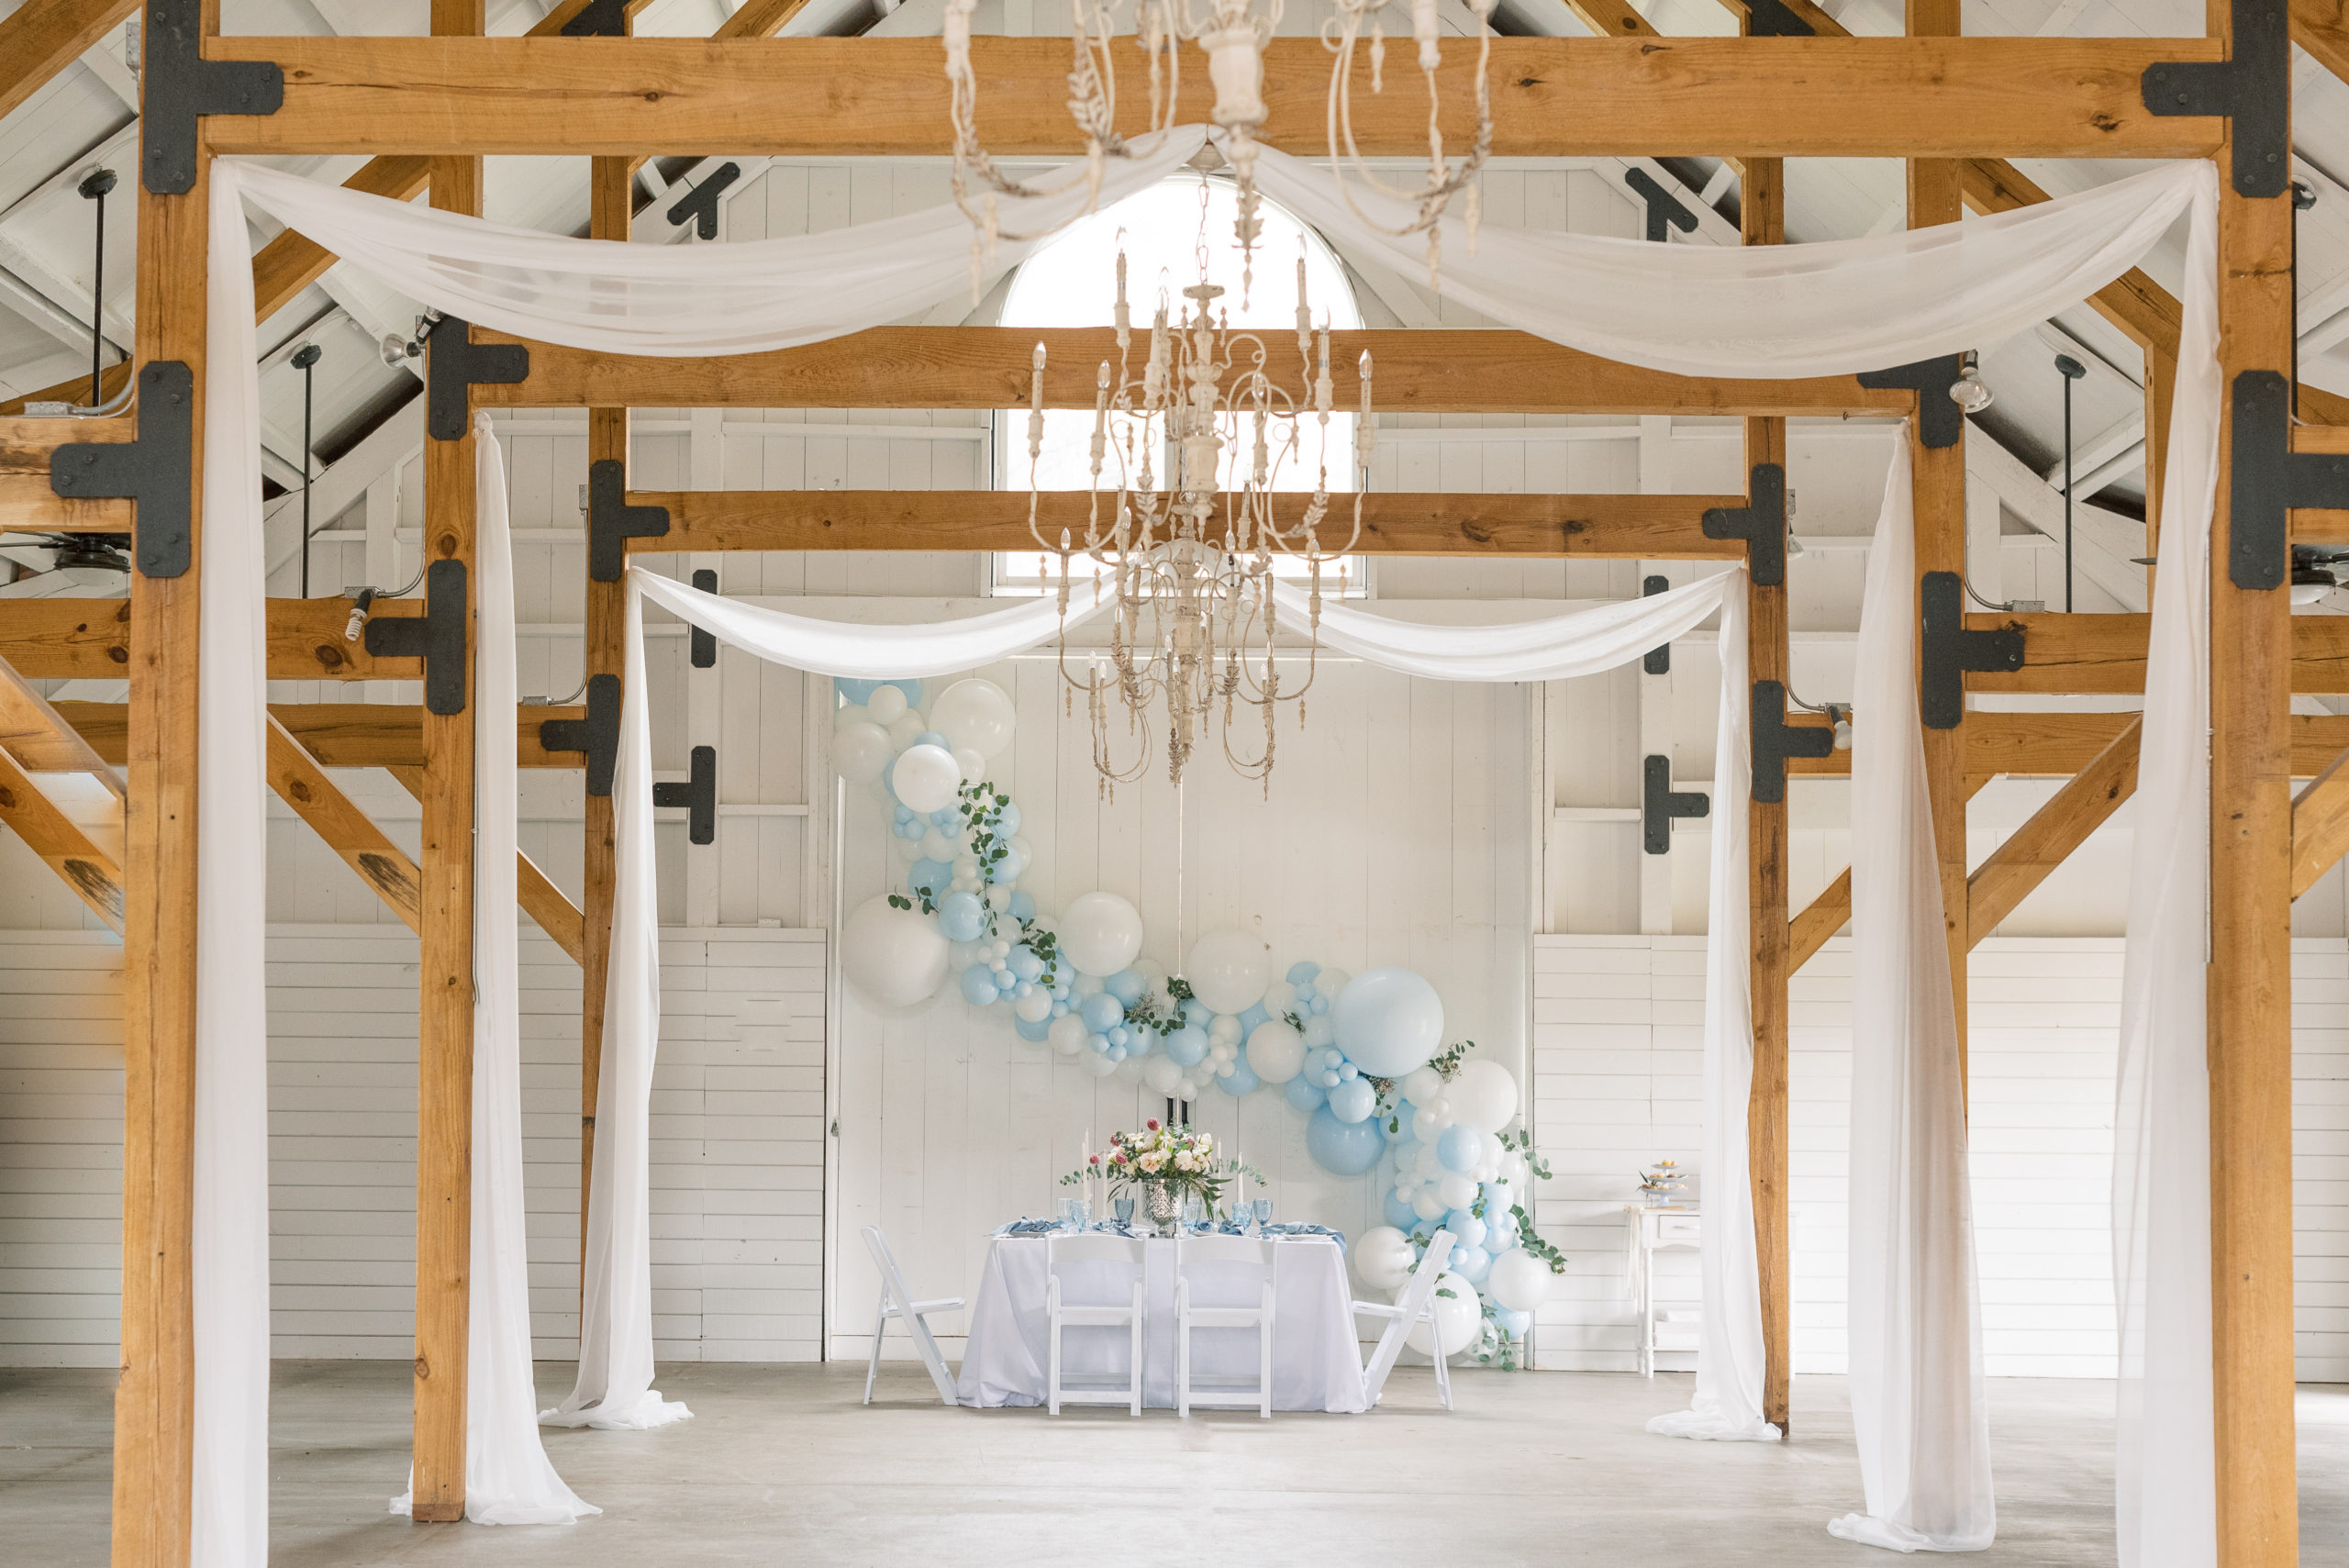 interior photo showing exposed wooden beams, ivory candelabras and white chiffon drapes with balloons in white and pastel blue